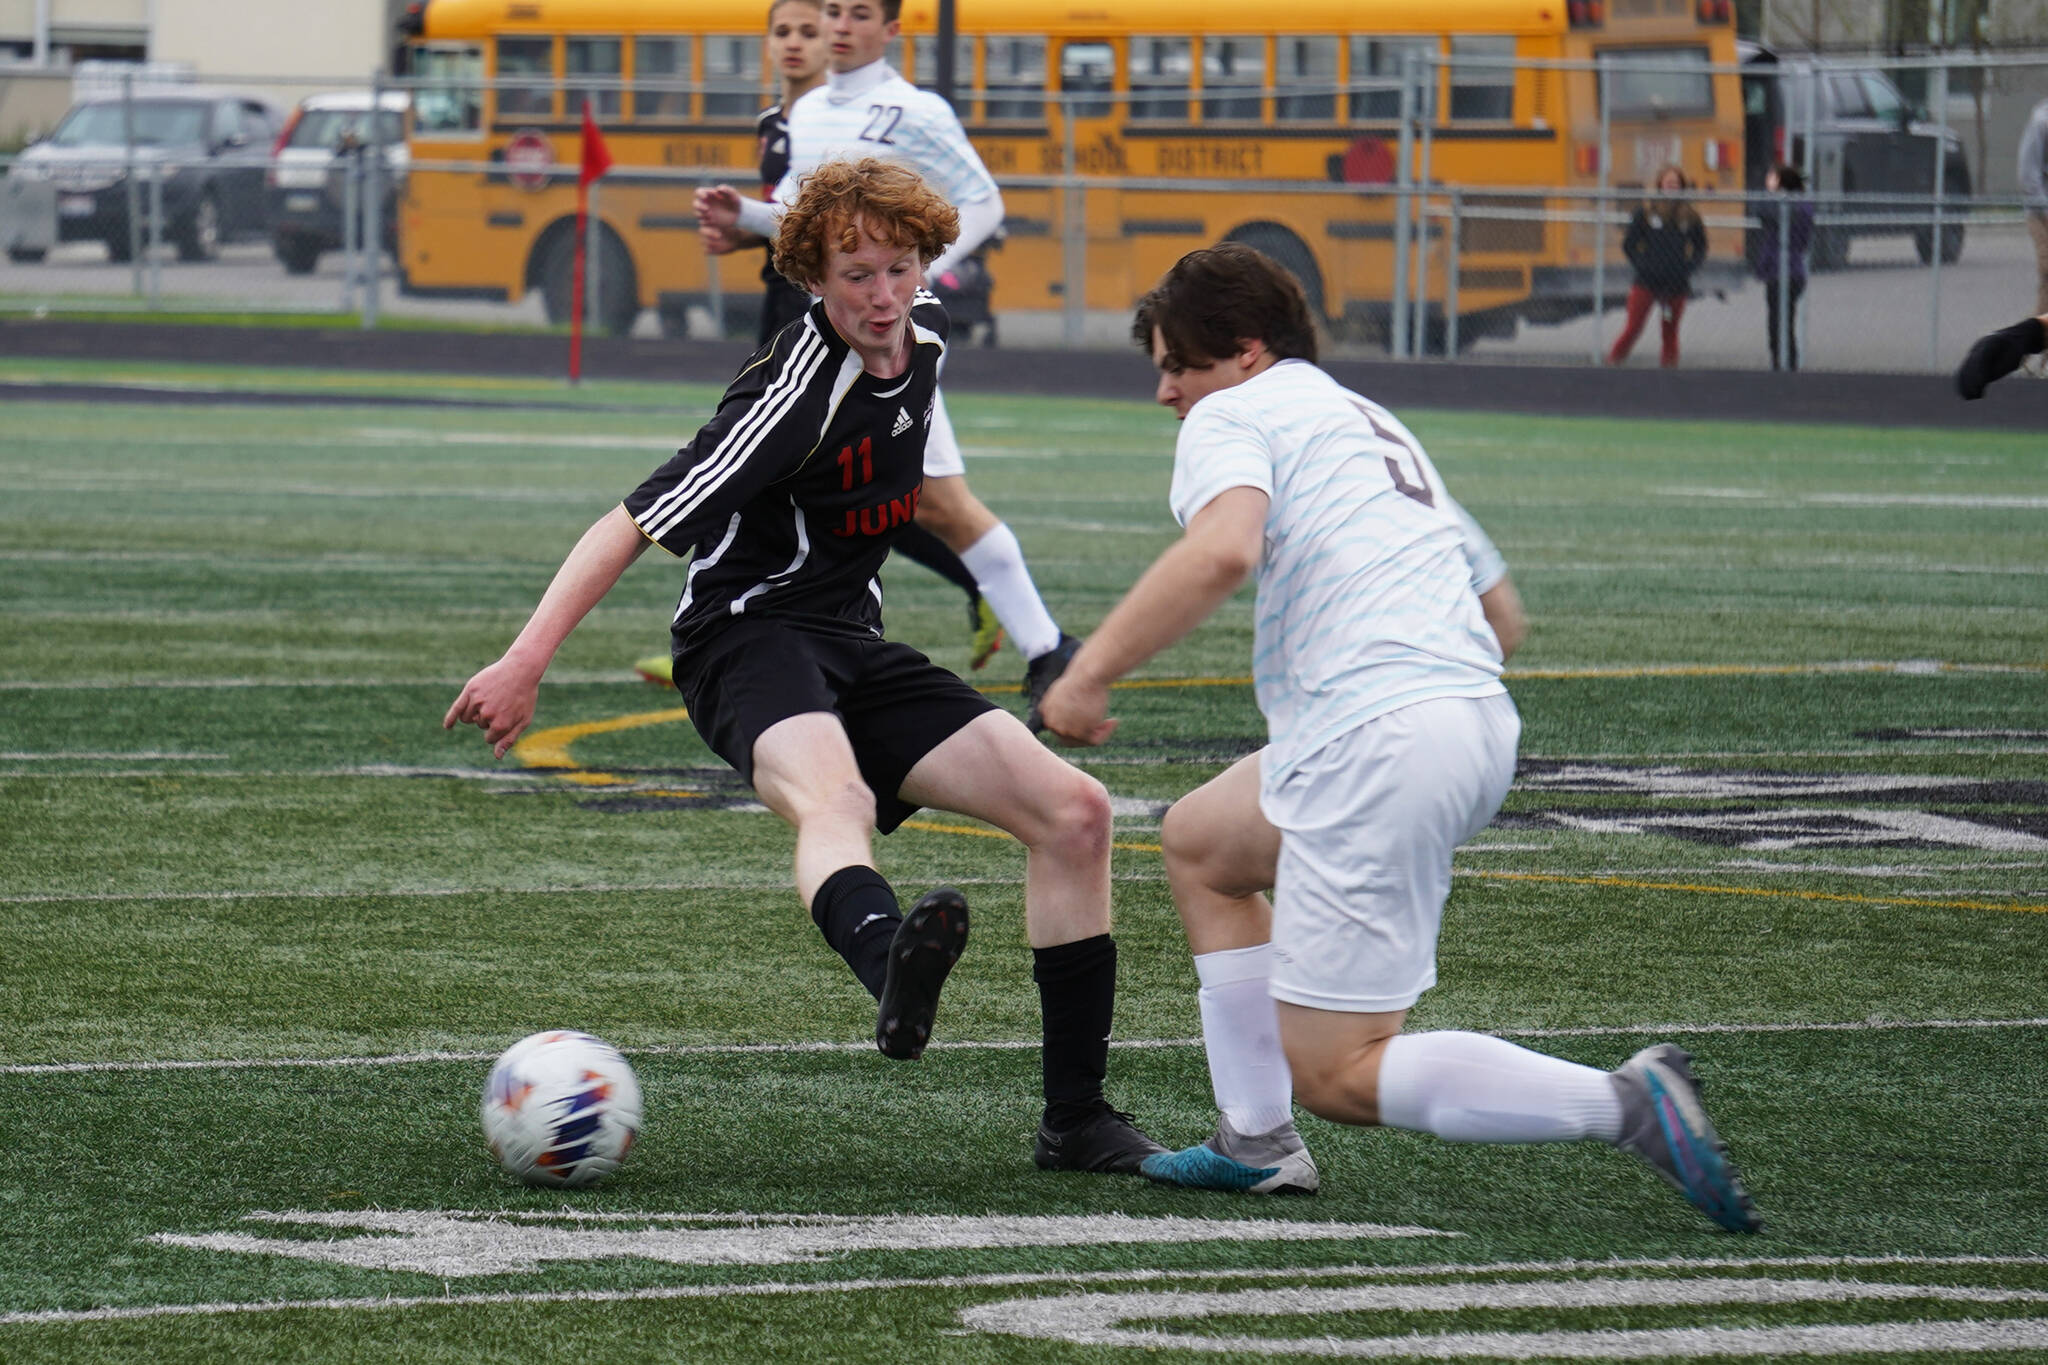 Juneau-Douglas’s Emmett Mesdag battles for the ball with Soldotna’s Gehret Medcoff during the Division II Soccer State Championship on Saturday, May 27, 2023, at West Anchorage High School in Anchorage, Alaska.